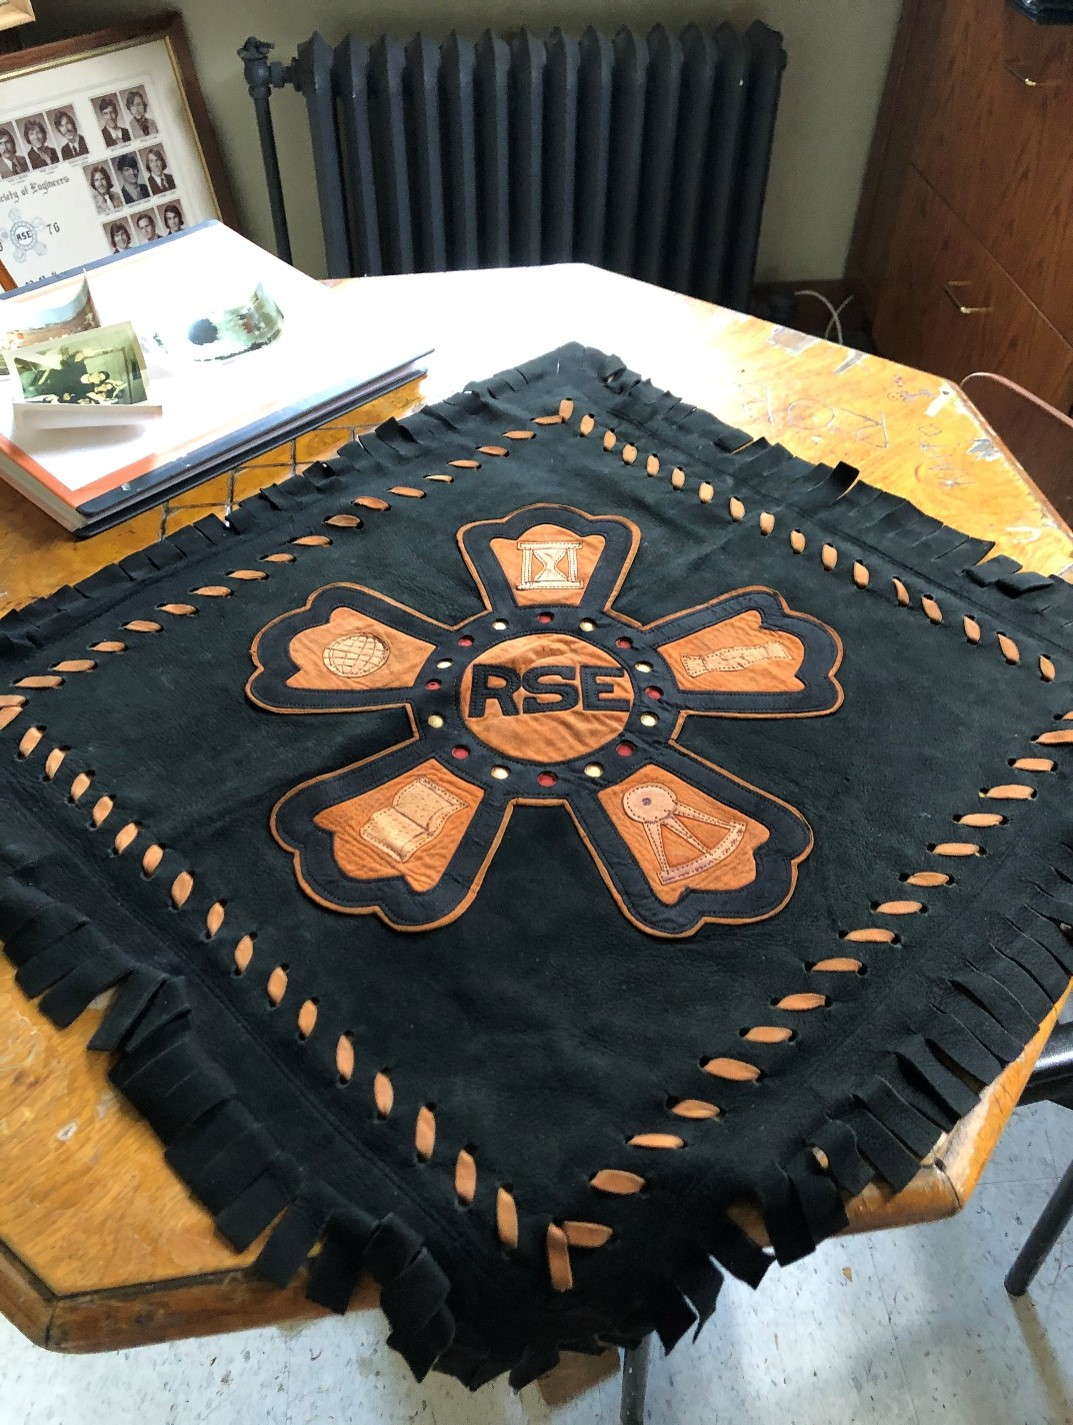 RSE Receives Suede RSE Seal from Daughter of 1938 Alumnus